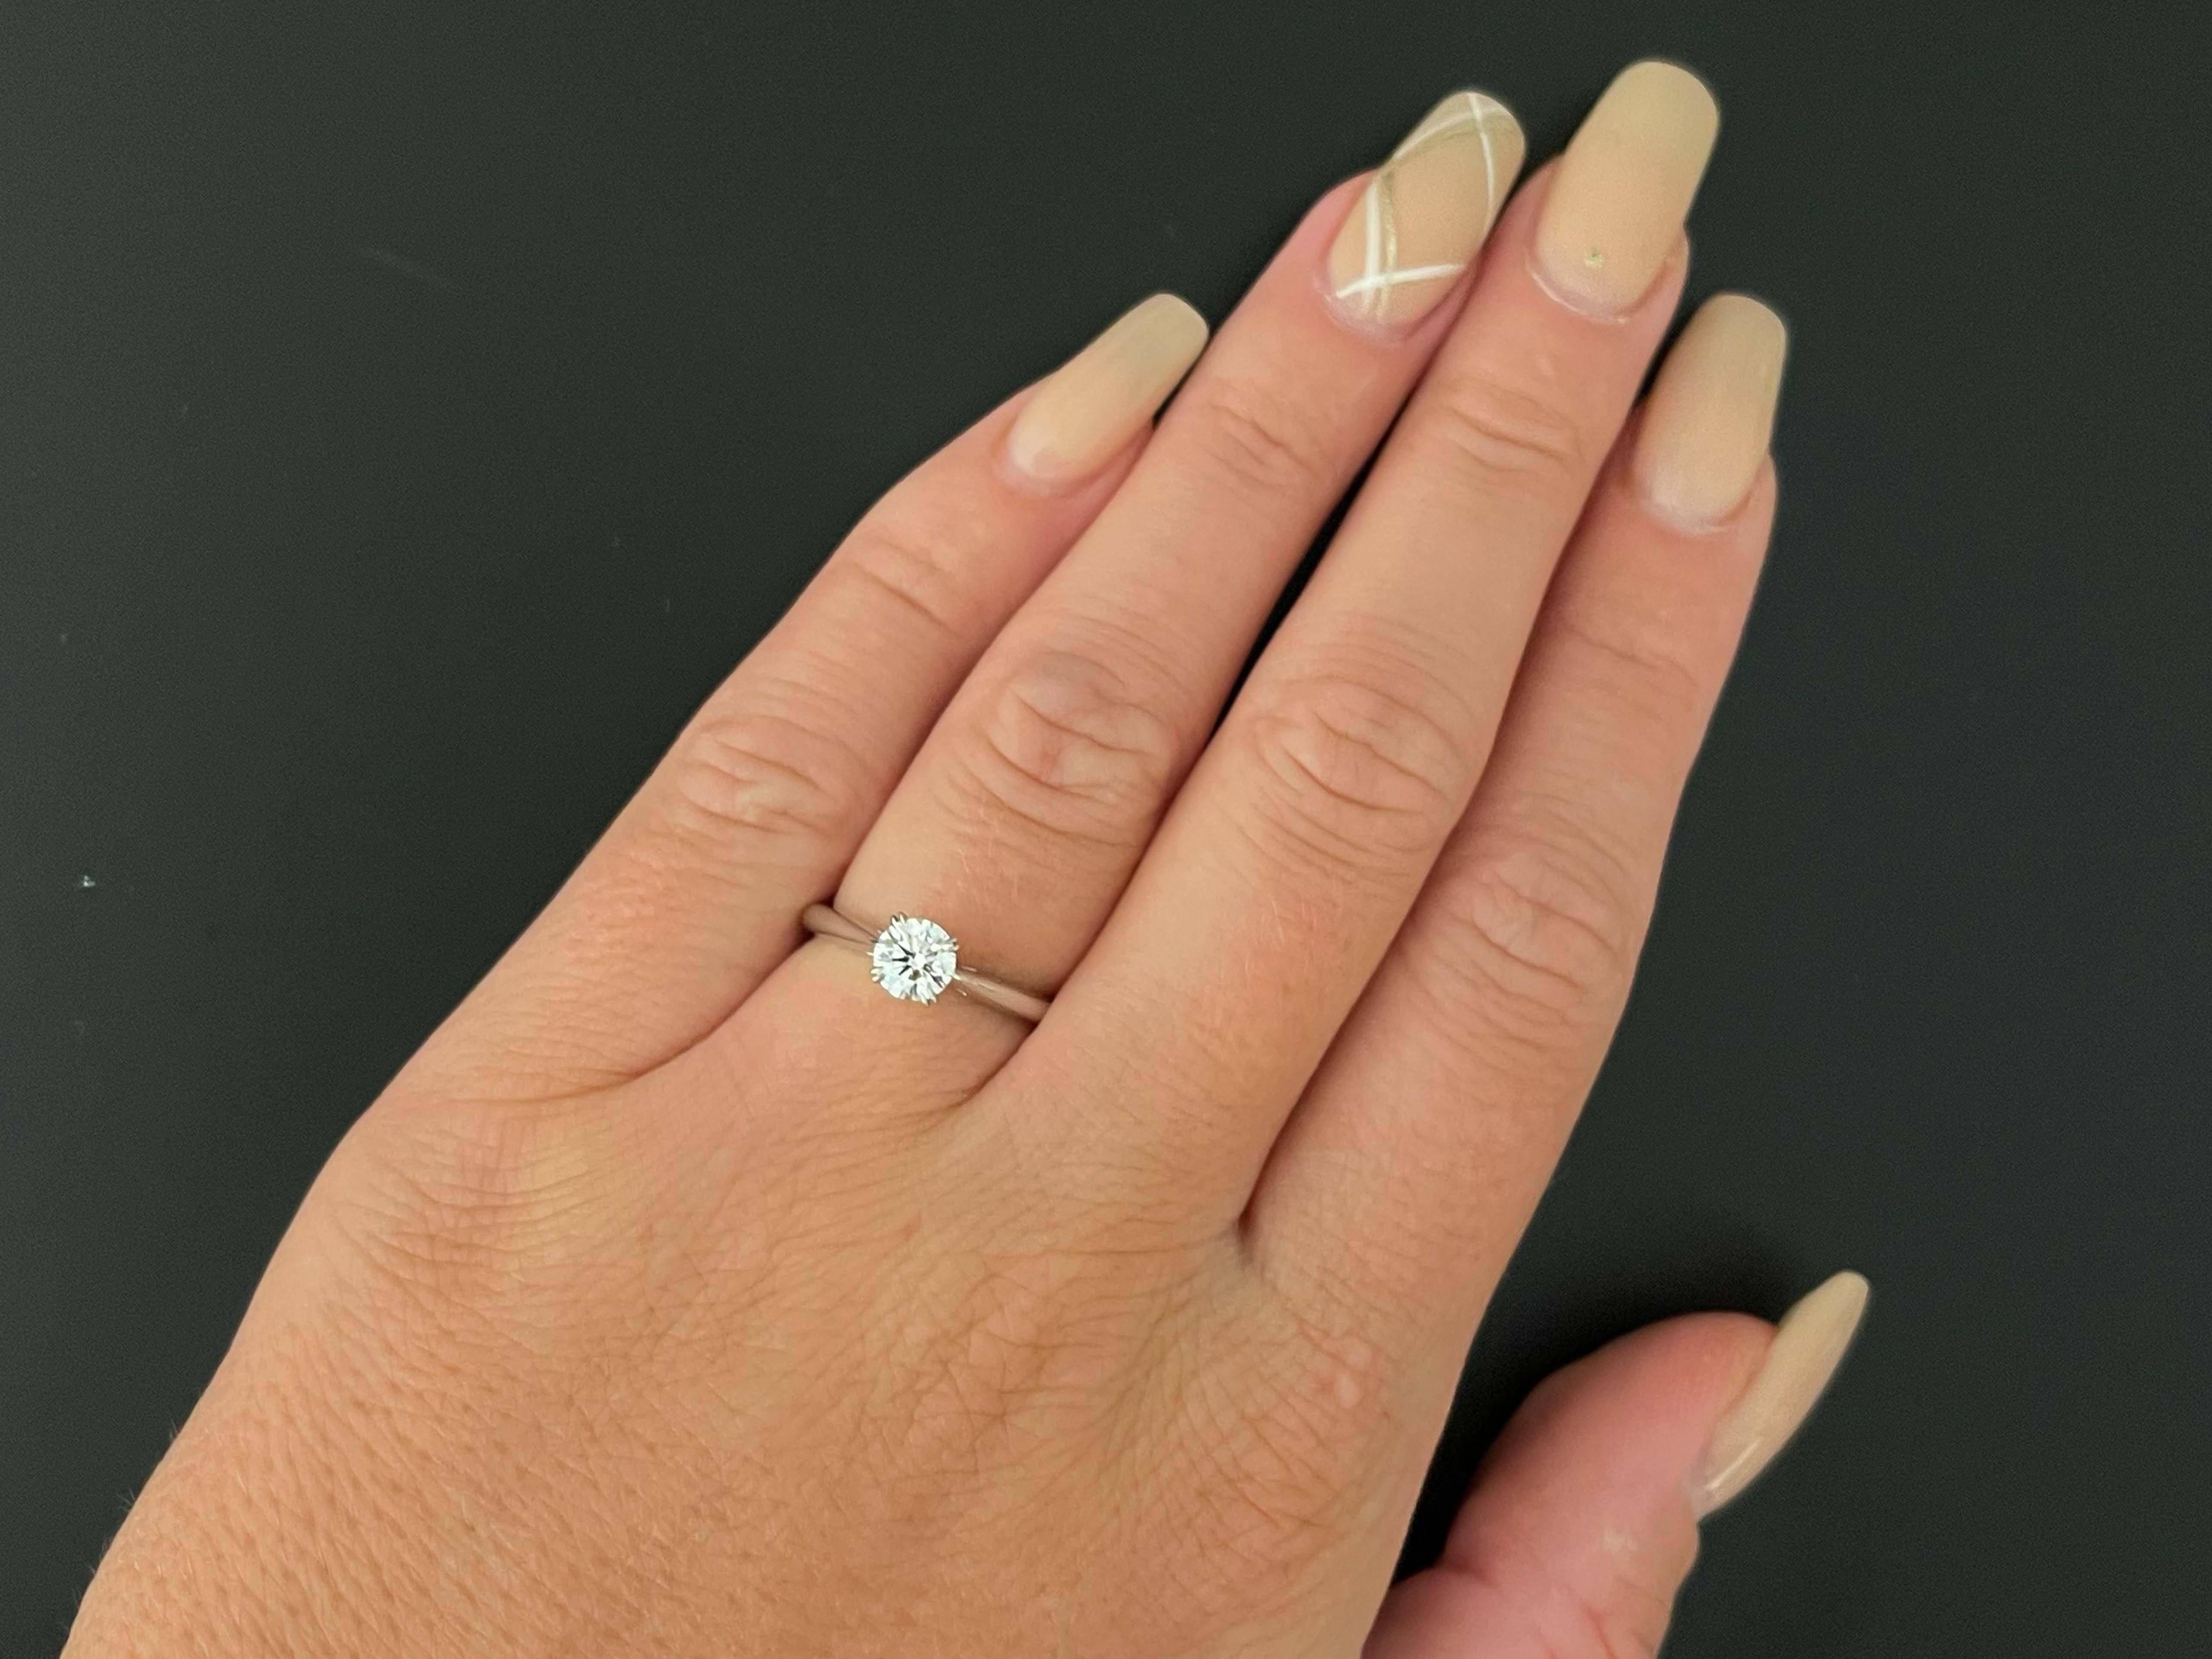 Harry Winston Solitaire Diamond Engagement Ring in Platinum features a round brilliant cut diamond D color, VS clarity weighing 0.57 carats. The diamond has excellent cut, symmetry and polish. An enduring emblem of commitment and love, Harry Winston